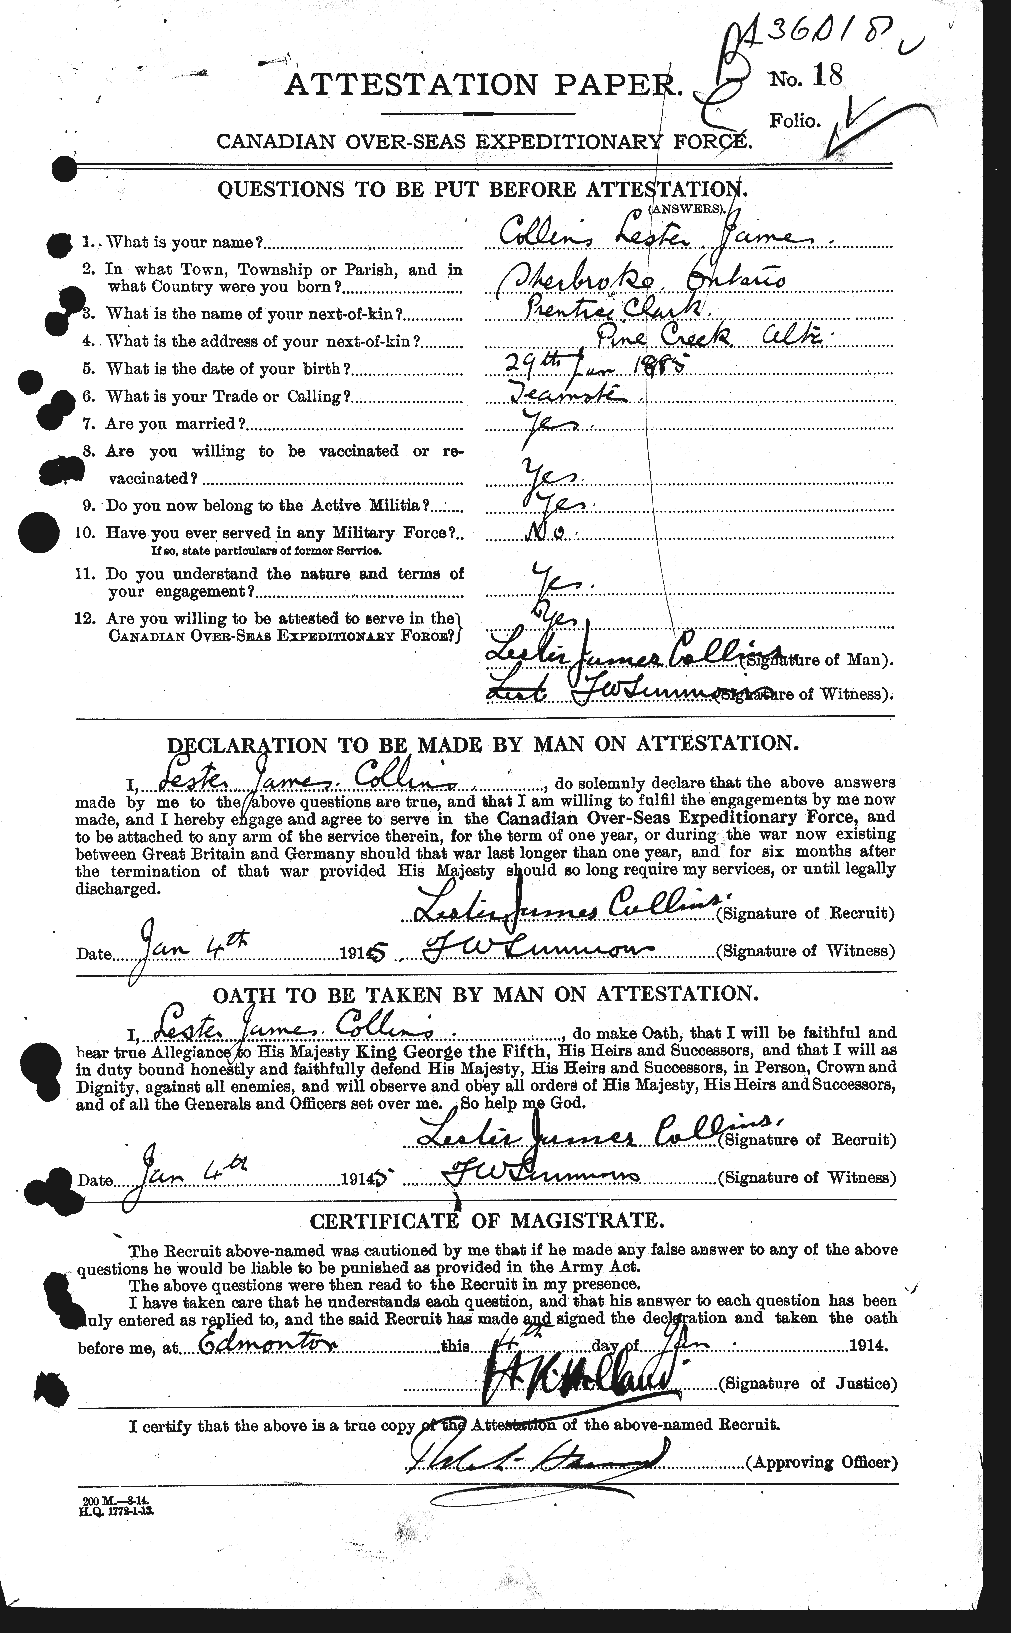 Personnel Records of the First World War - CEF 069334a